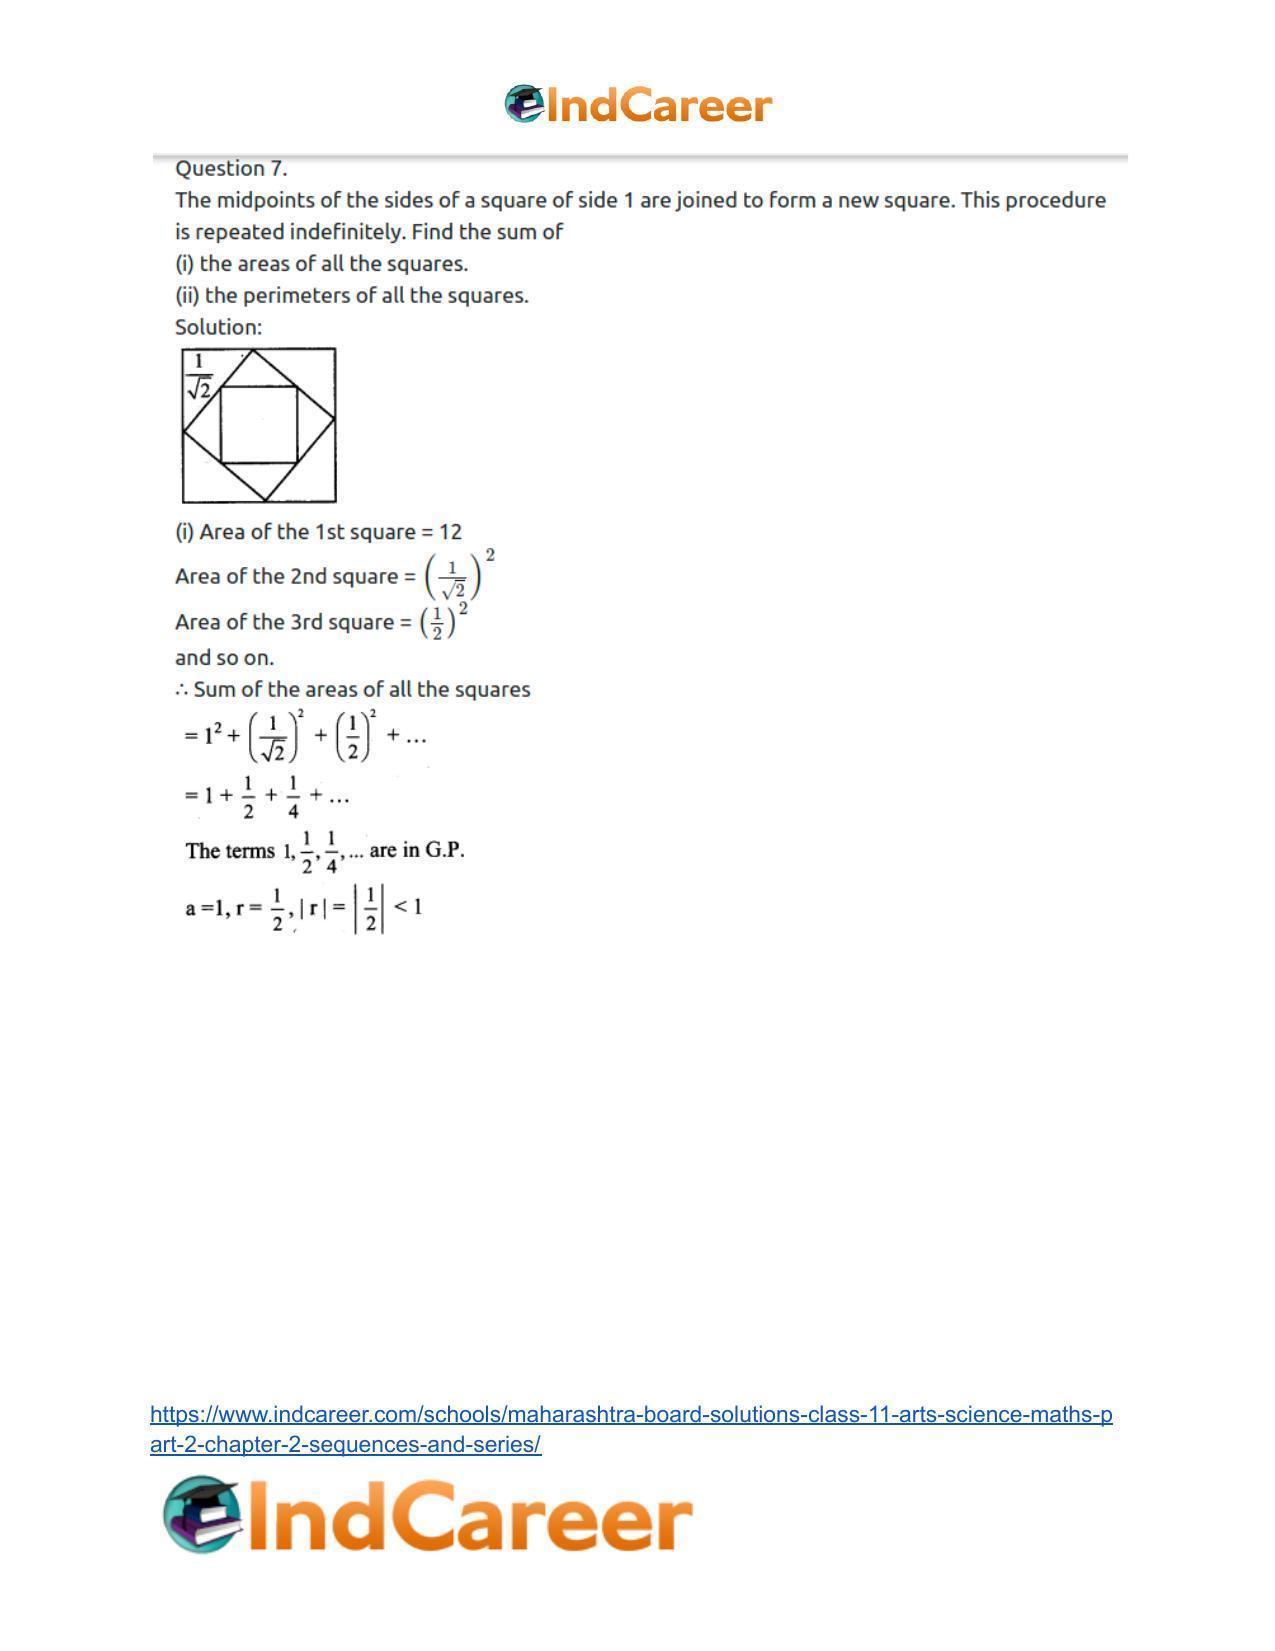 Maharashtra Board Solutions Class 11-Arts & Science Maths (Part 2): Chapter 2- Sequences and Series - Page 48